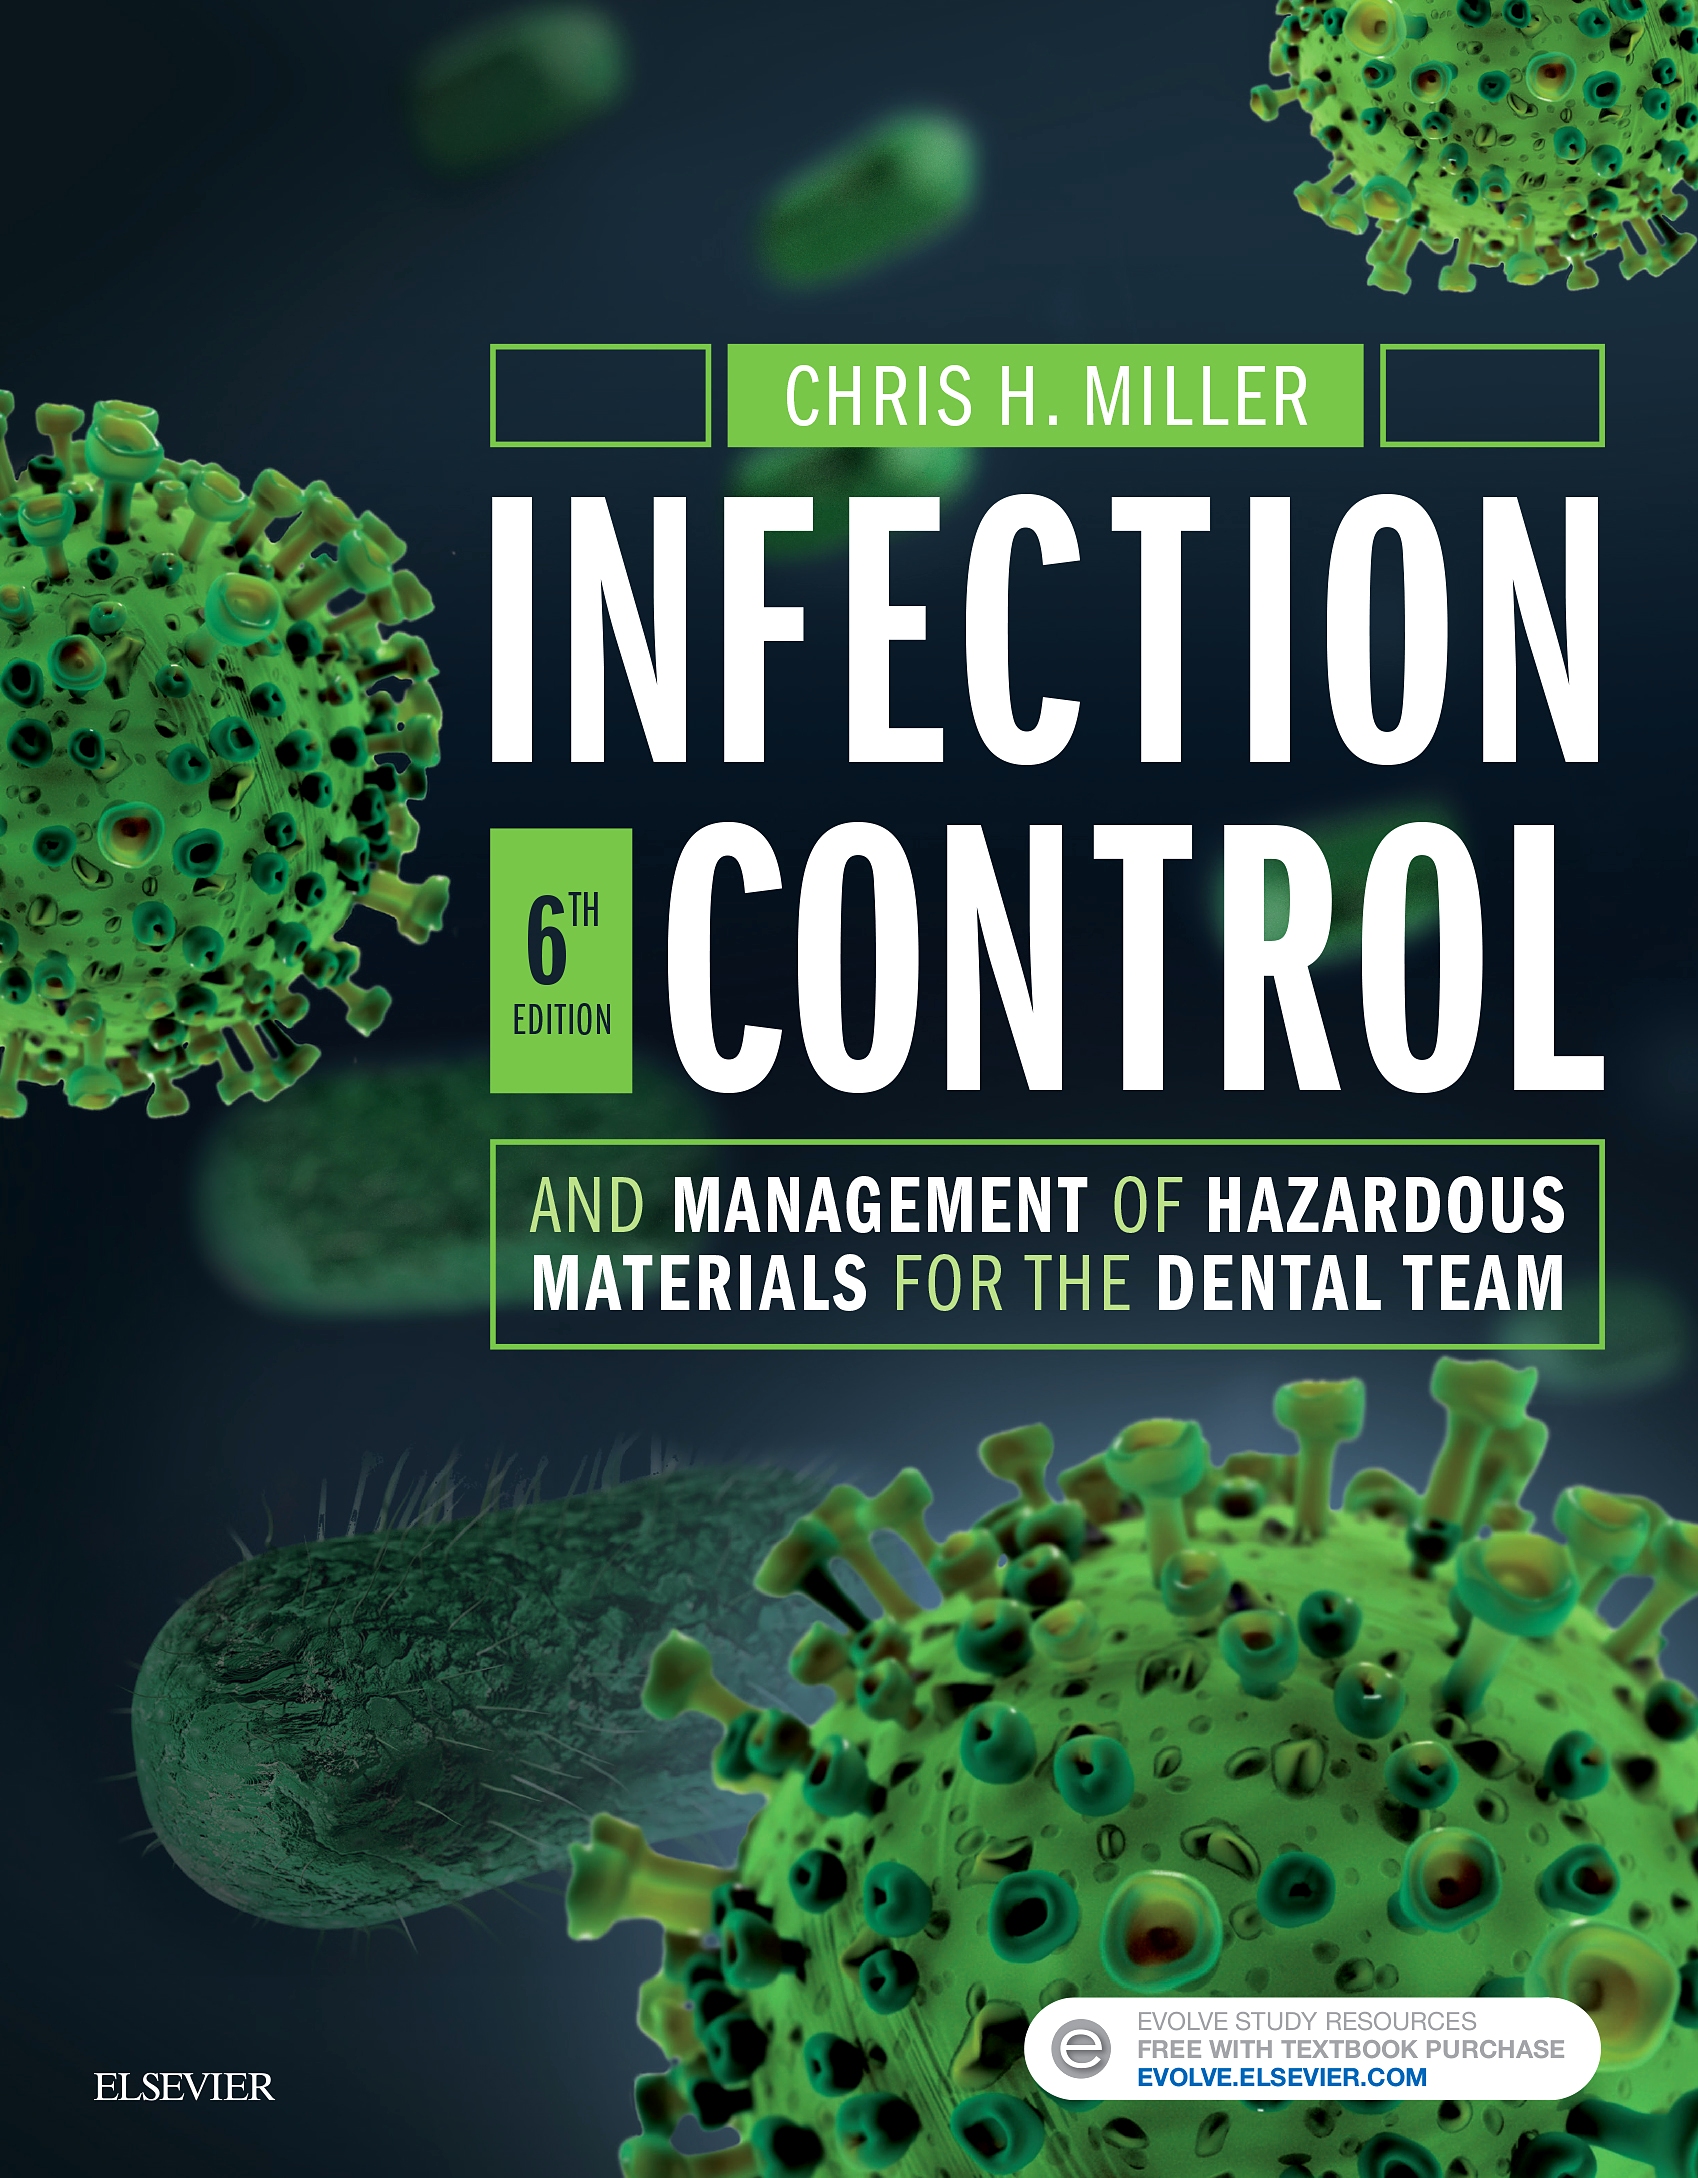 Evolve Resources for Infection Control and Management of Hazardous Materials for the Dental Team, 6th Edition